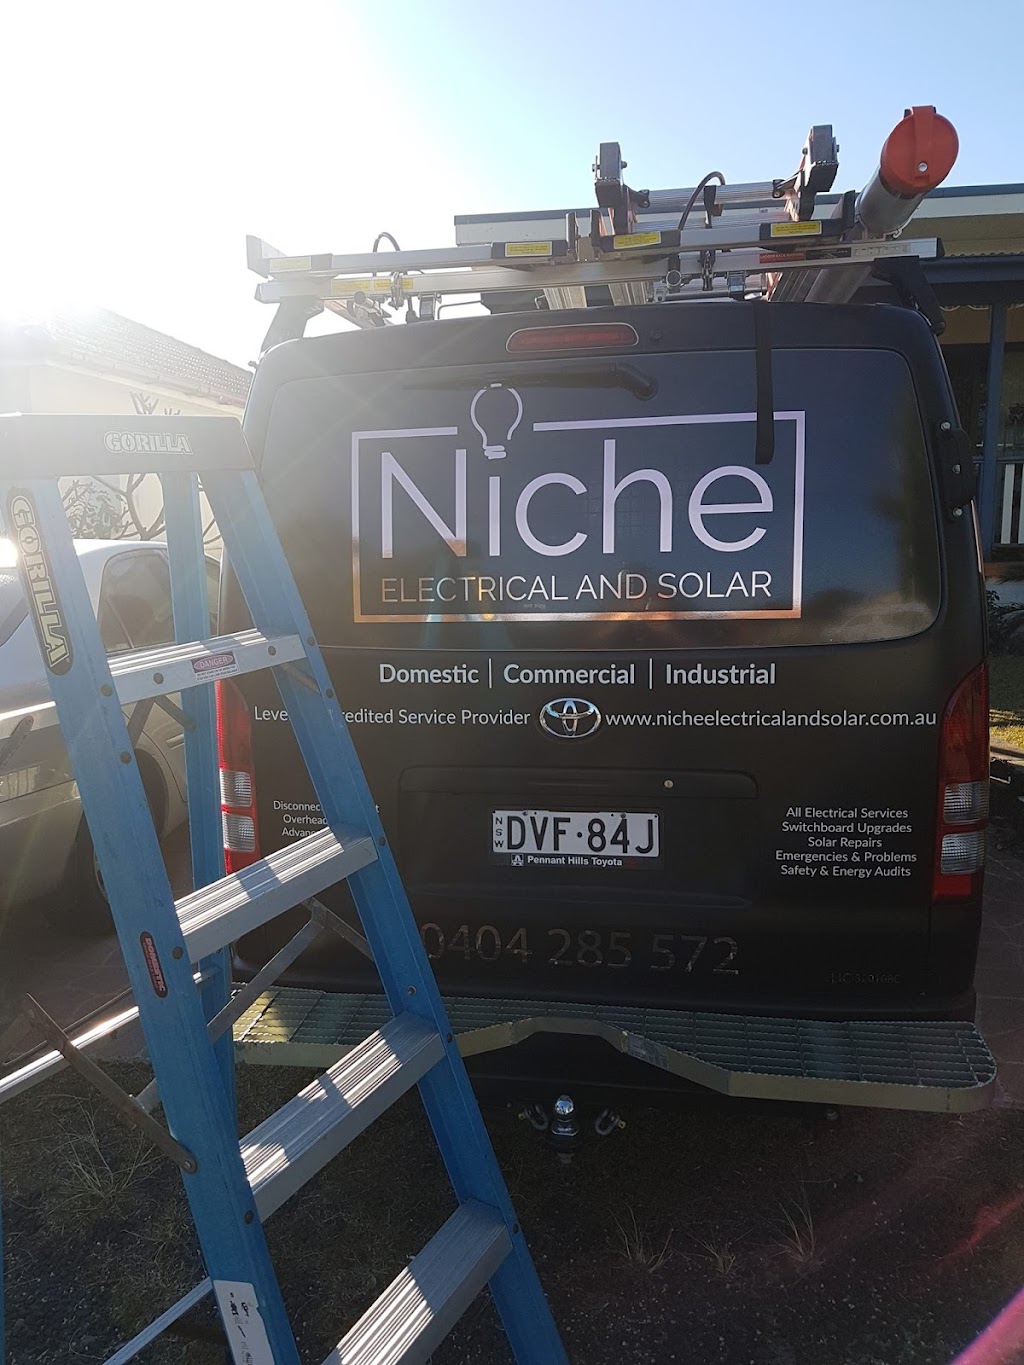 Niche Electrical and Solar - Level 2 Electrician | electrician | 29 Alistair Ave, Forresters Beach NSW 2260, Australia | 0404285572 OR +61 404 285 572